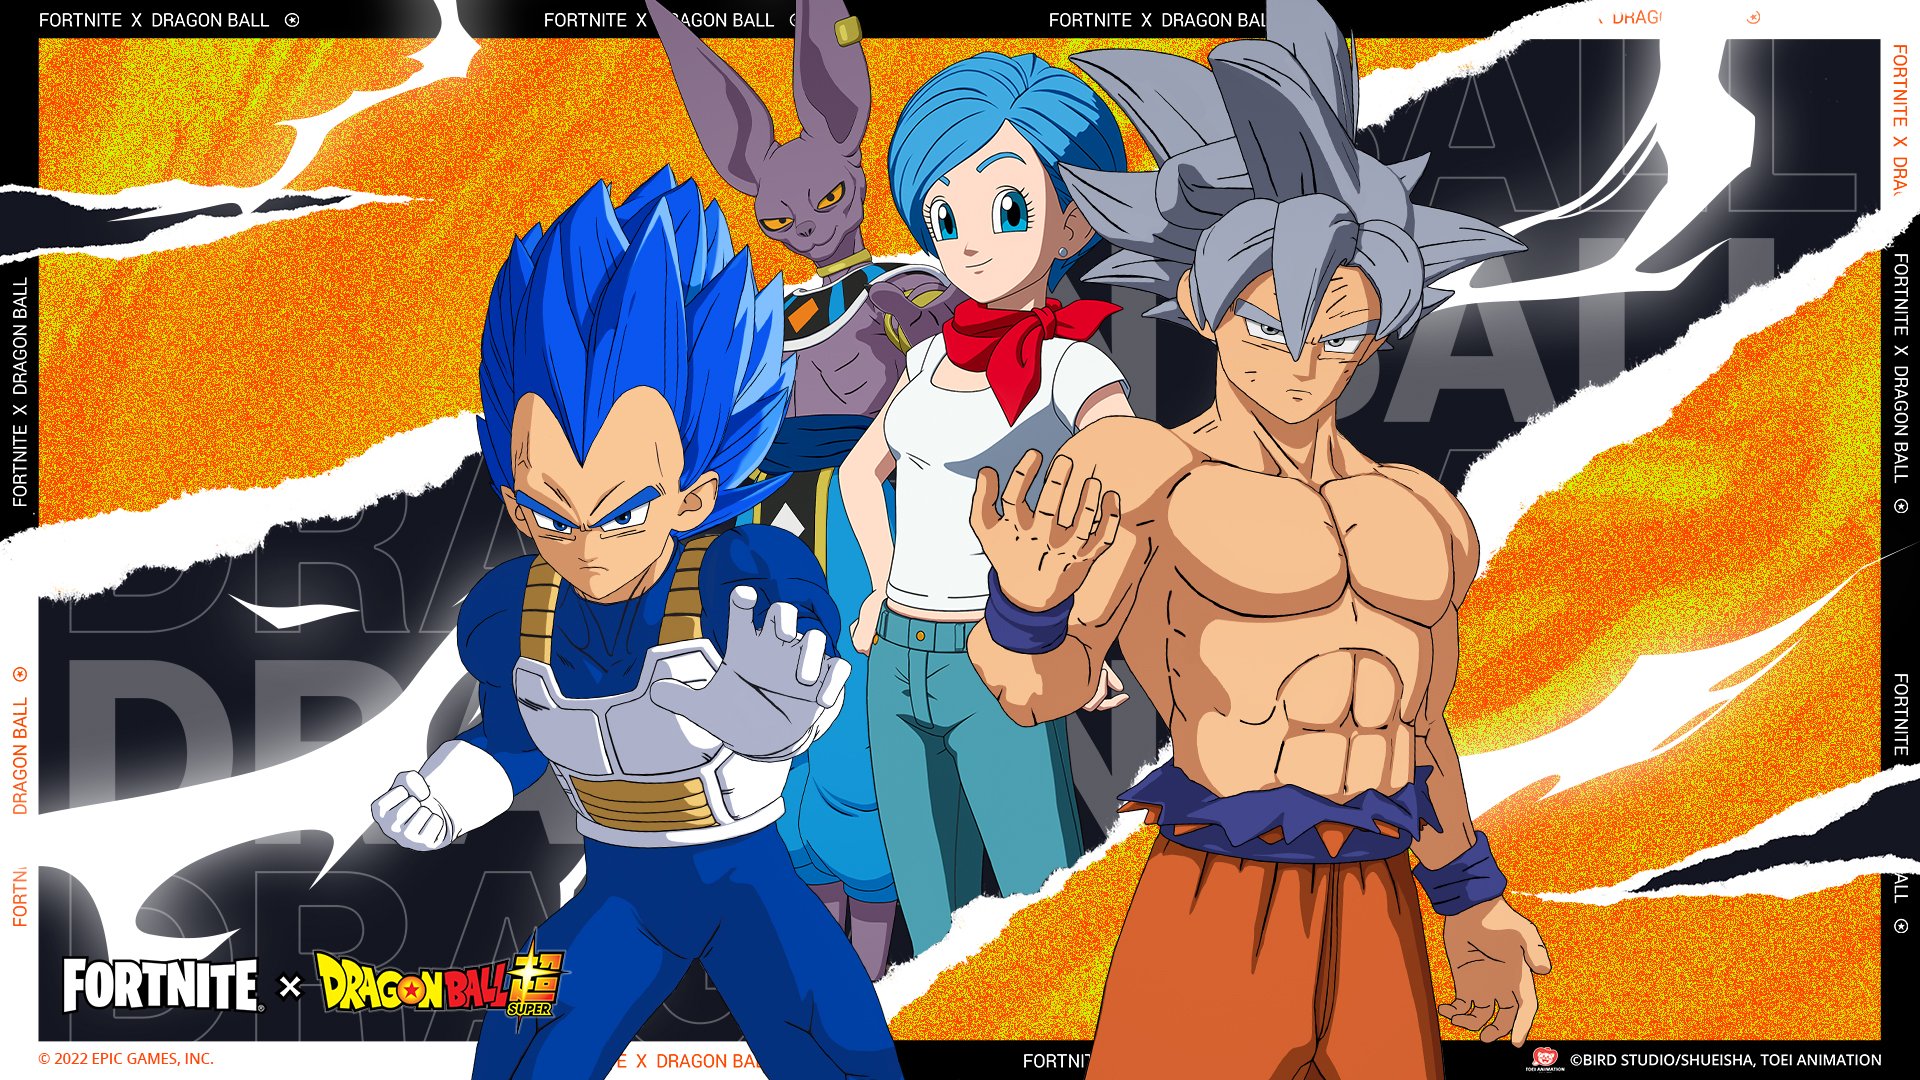 Fortnite's right, Son Goku, Vegeta, Bulma and Beerus of Dragon Ball Super have arrived